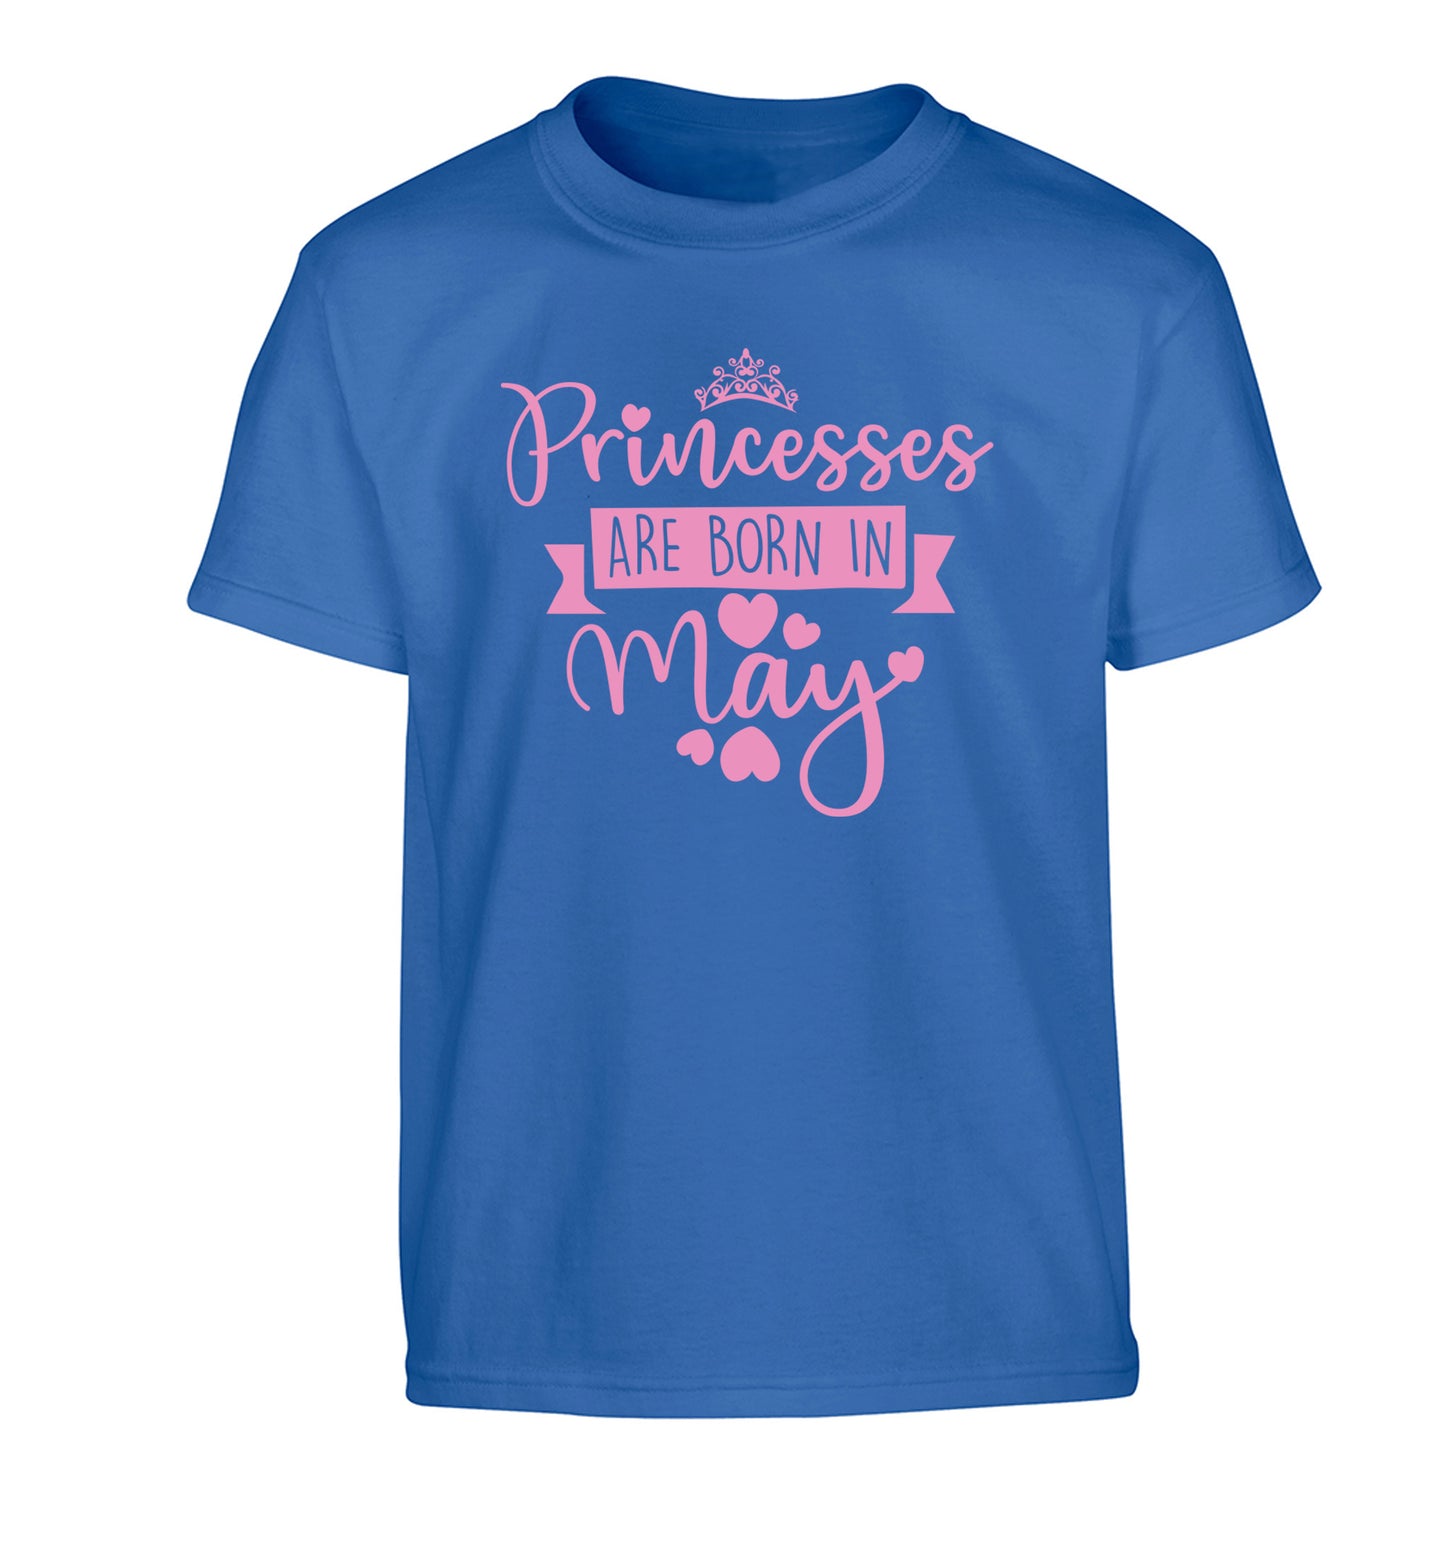 Princesses are born in May Children's blue Tshirt 12-13 Years